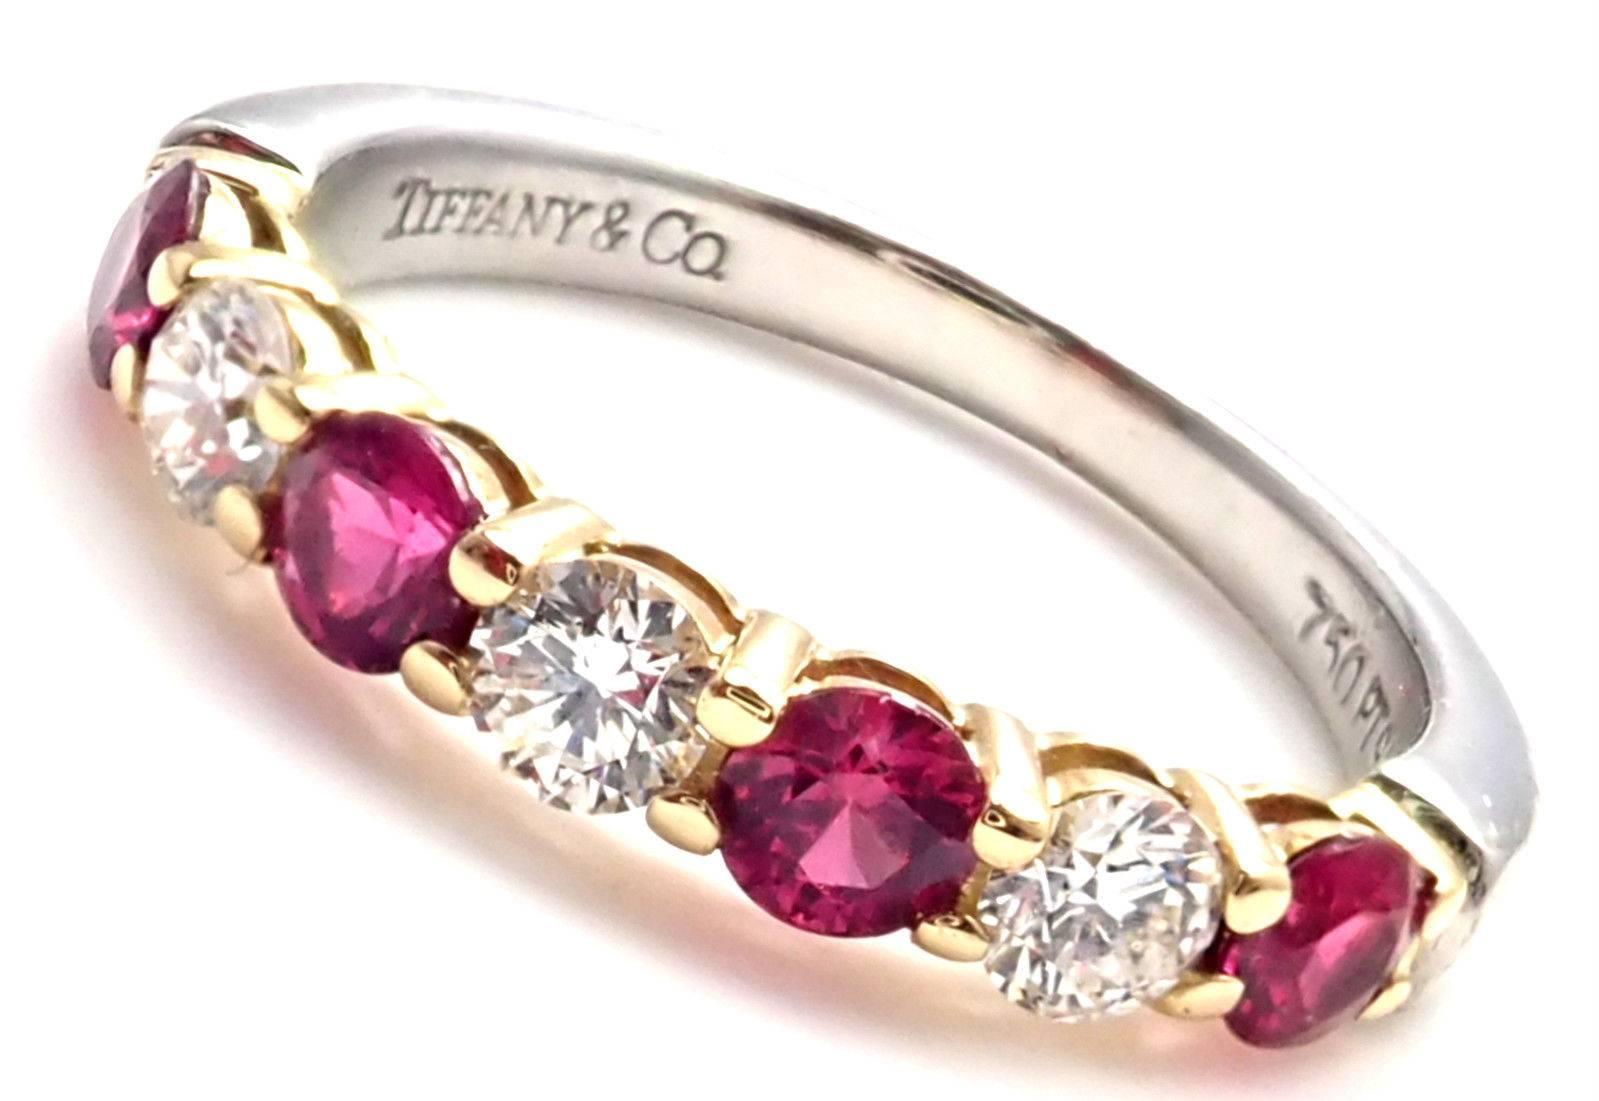 Platinum & Yellow Gold Diamond Ruby Band Ring by Tiffany & Co. 
With 3x Round brilliant cut diamonds VS1 clarity, G color total weight approx. .25ct
4x Round rubies .35ct
Details: 
Weight: 3.1 grams
Ring Size: 3.5 - Resize Available
Band width at